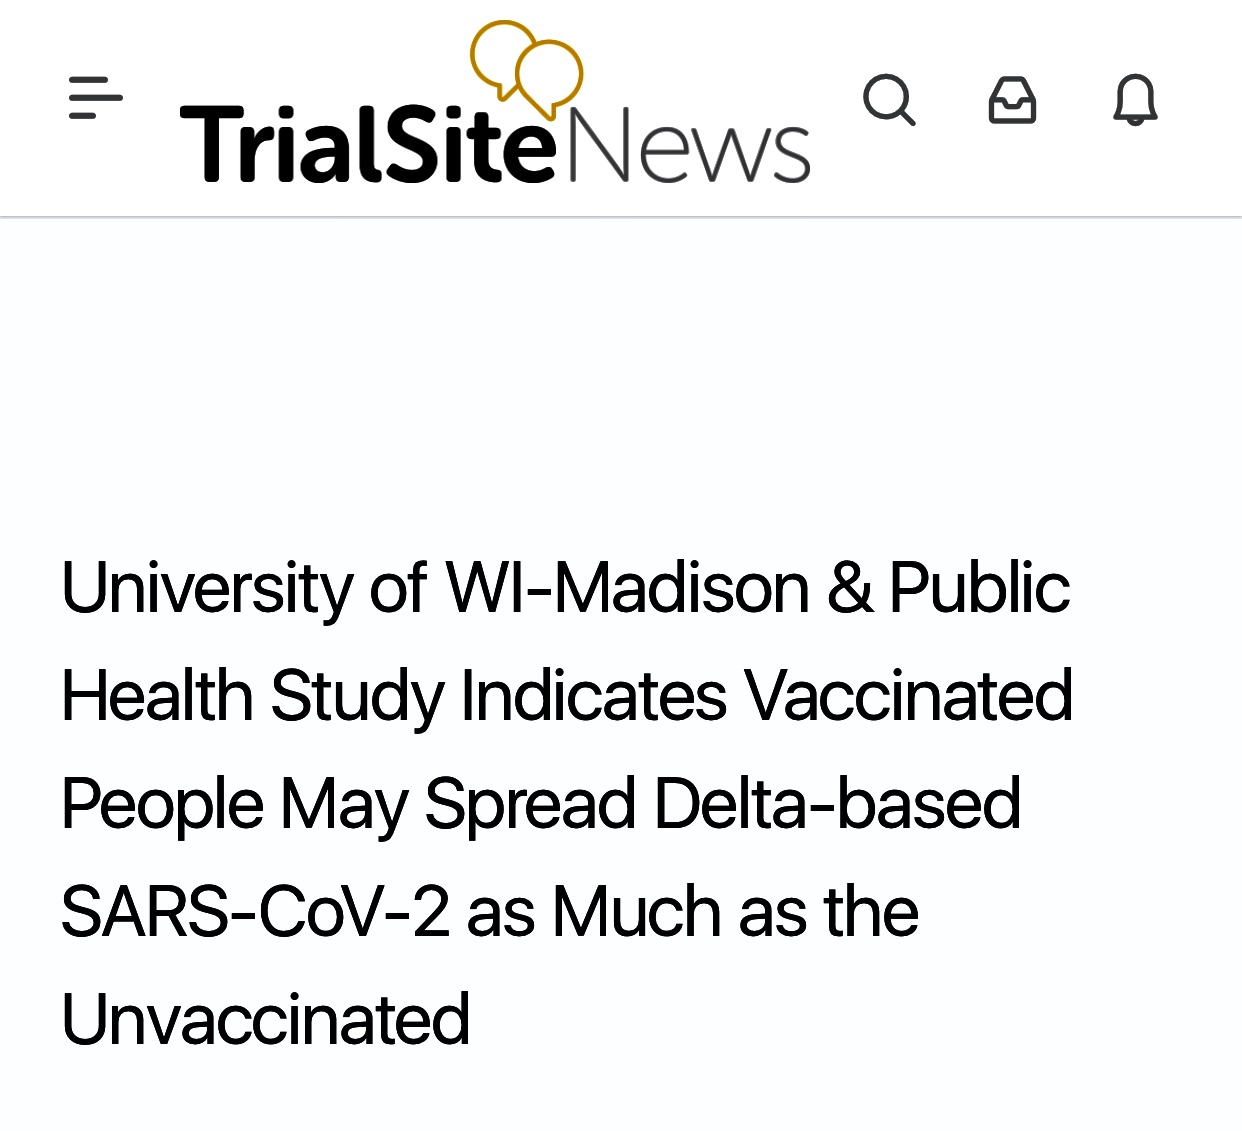 🚨🚨🚨University of WI-Madison & Public Health Study Indicates Vaccinated People May Spread Delta-based COVID as Much as Unvaccinated